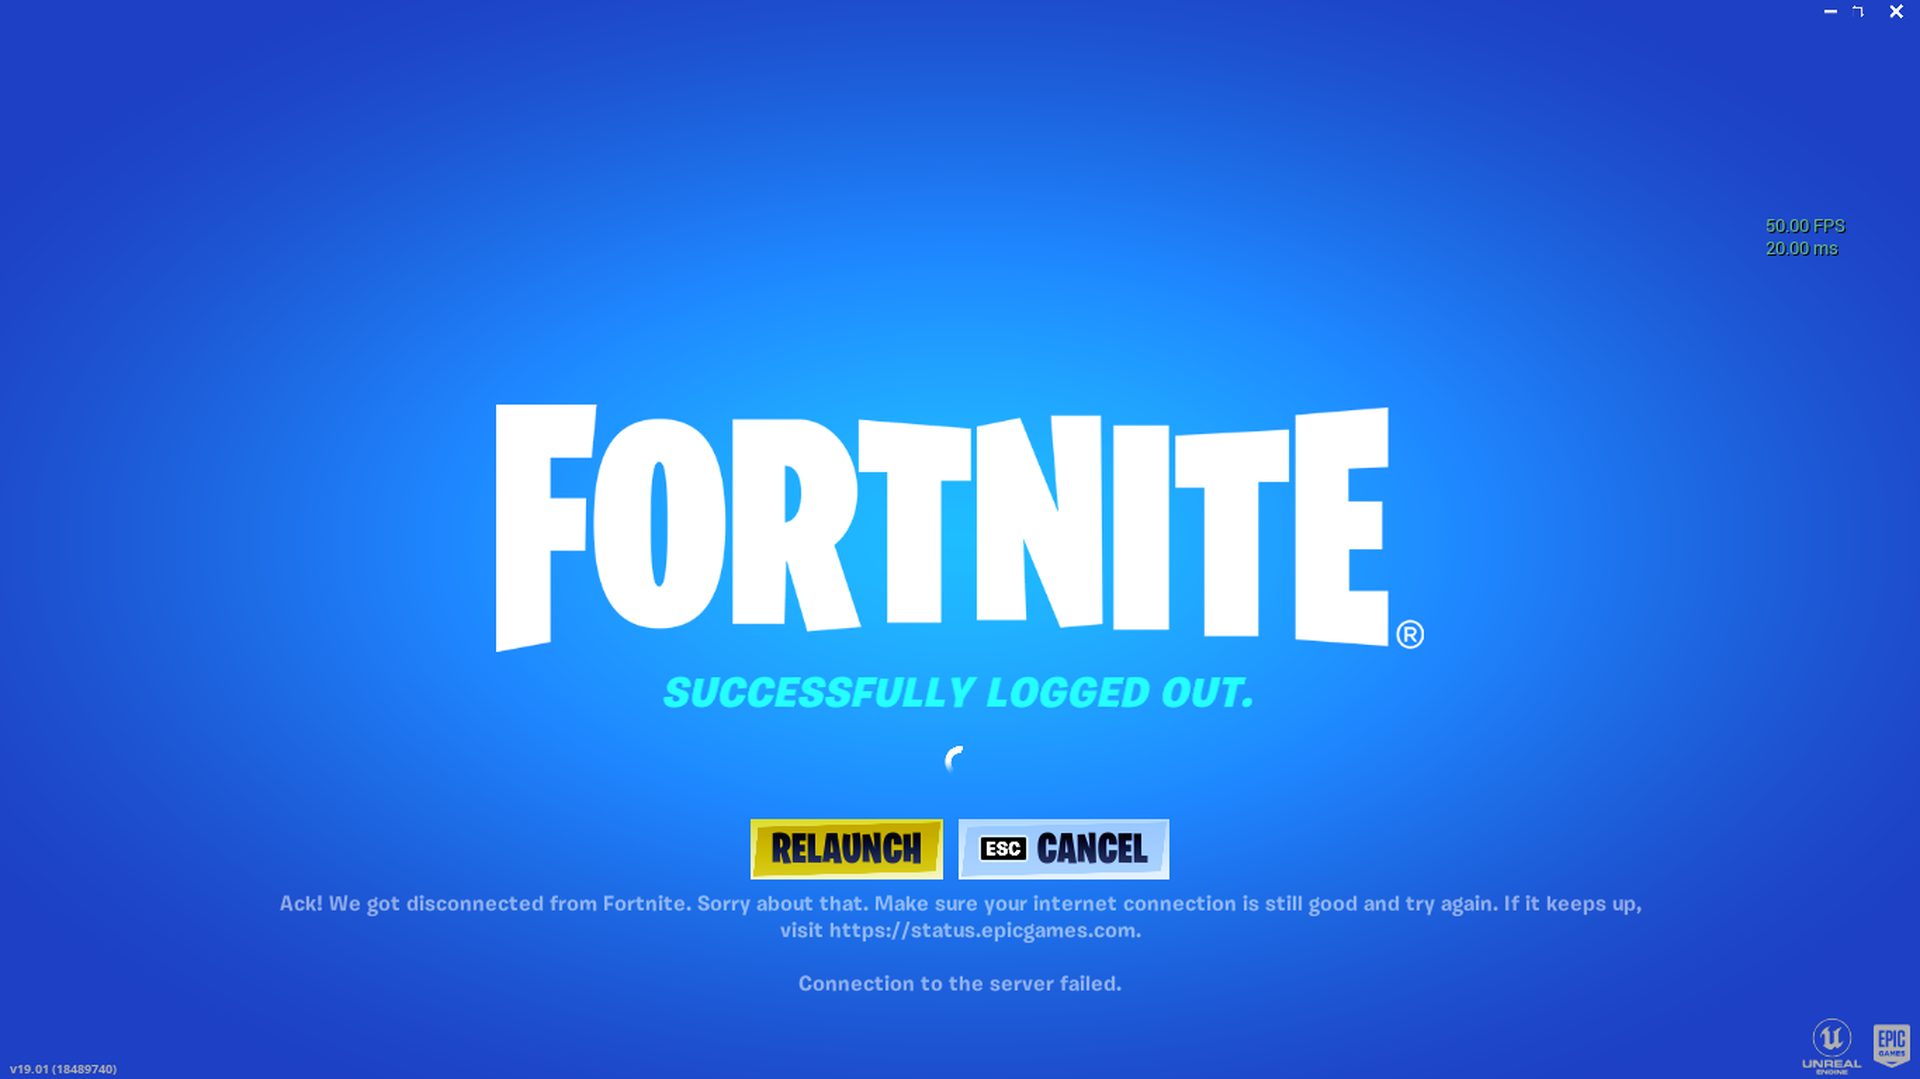 Fortnite successfully logged out error: How to fix it?